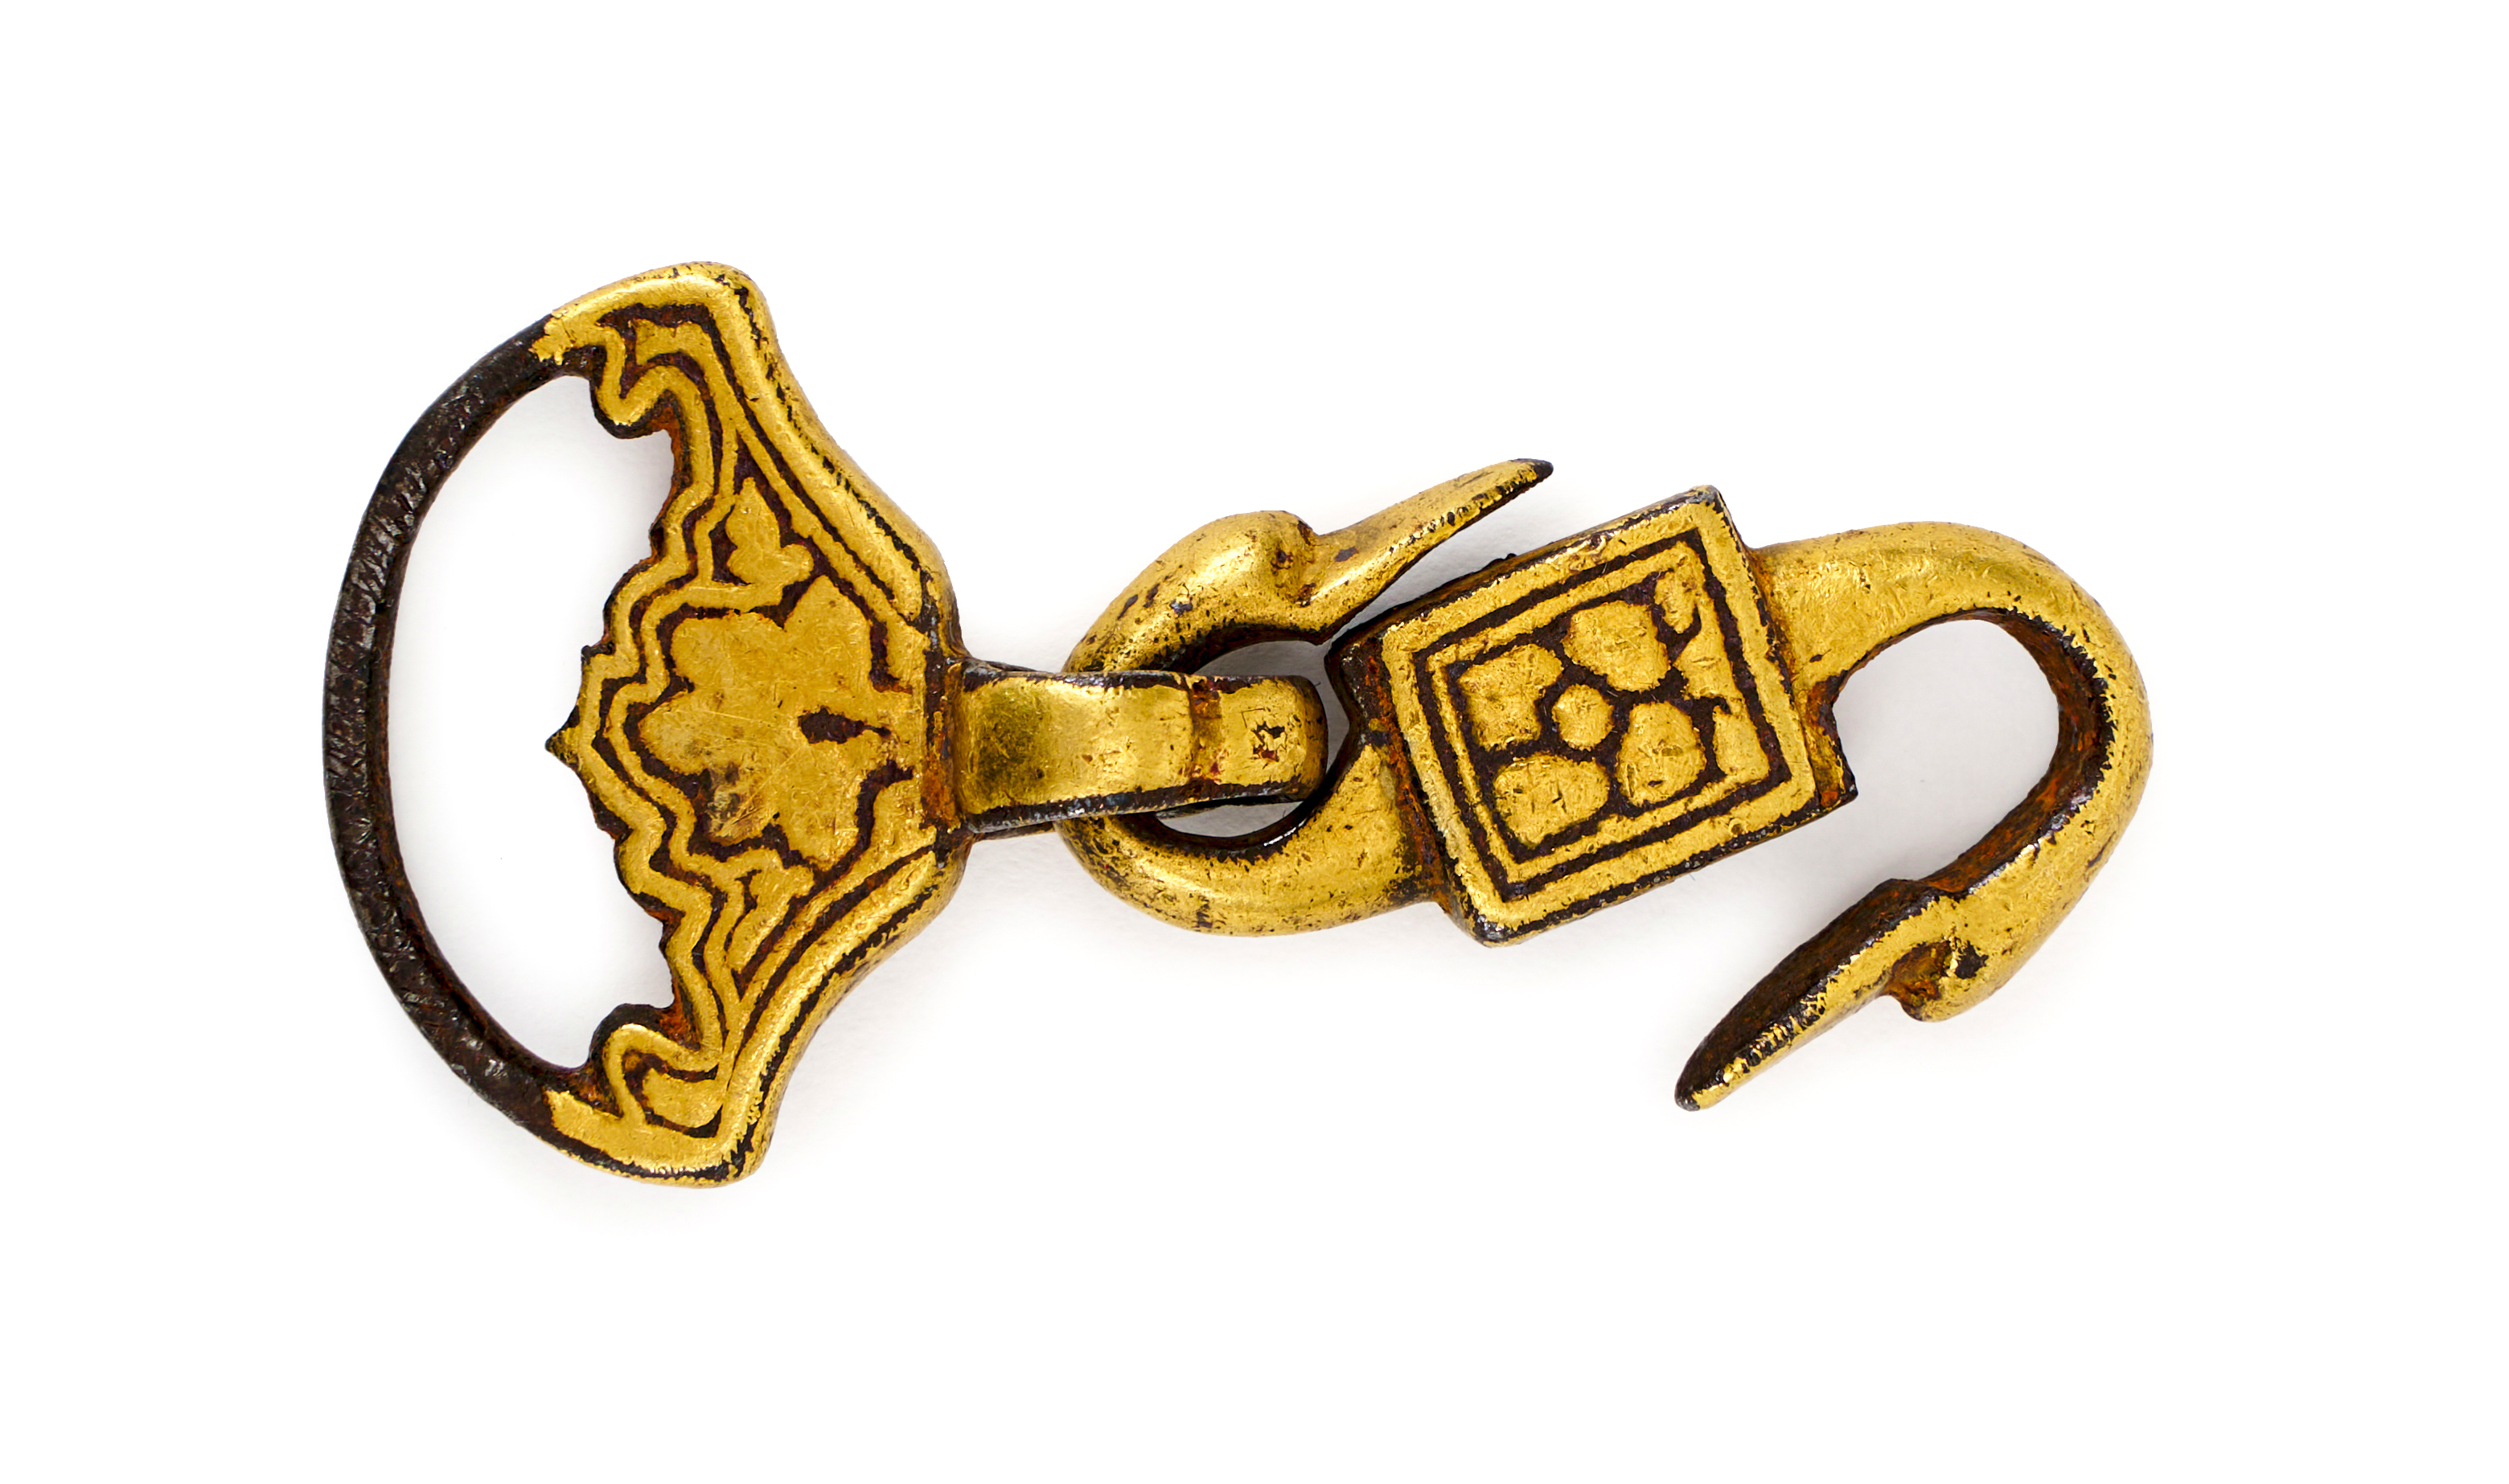 A SAFAVID DAMASCENED ATTACHMENT IN THE FORM OF A DUCK, 17TH CENTURY, PERSIA - Image 2 of 3